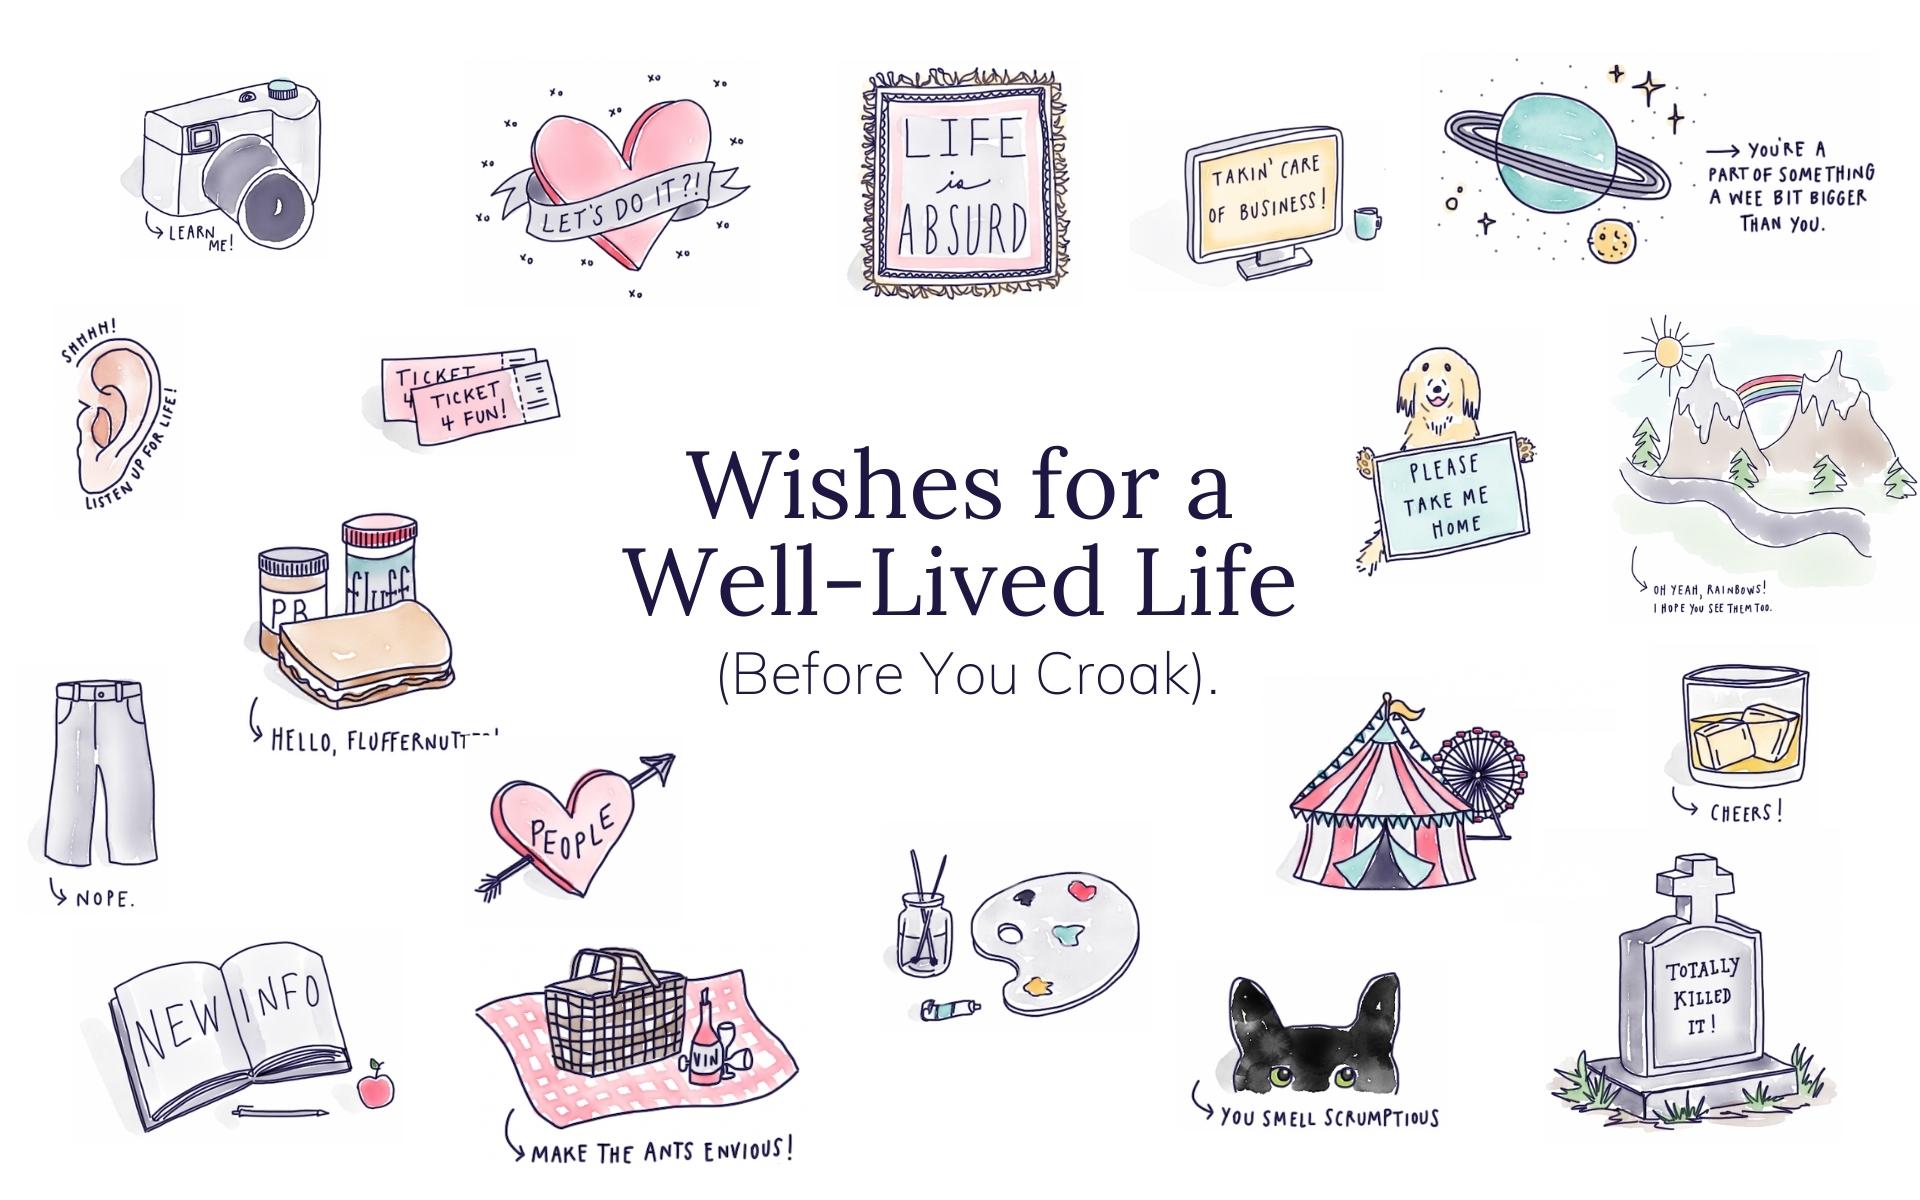 Wishes for a Well-Lived Life (Before You Croak)!